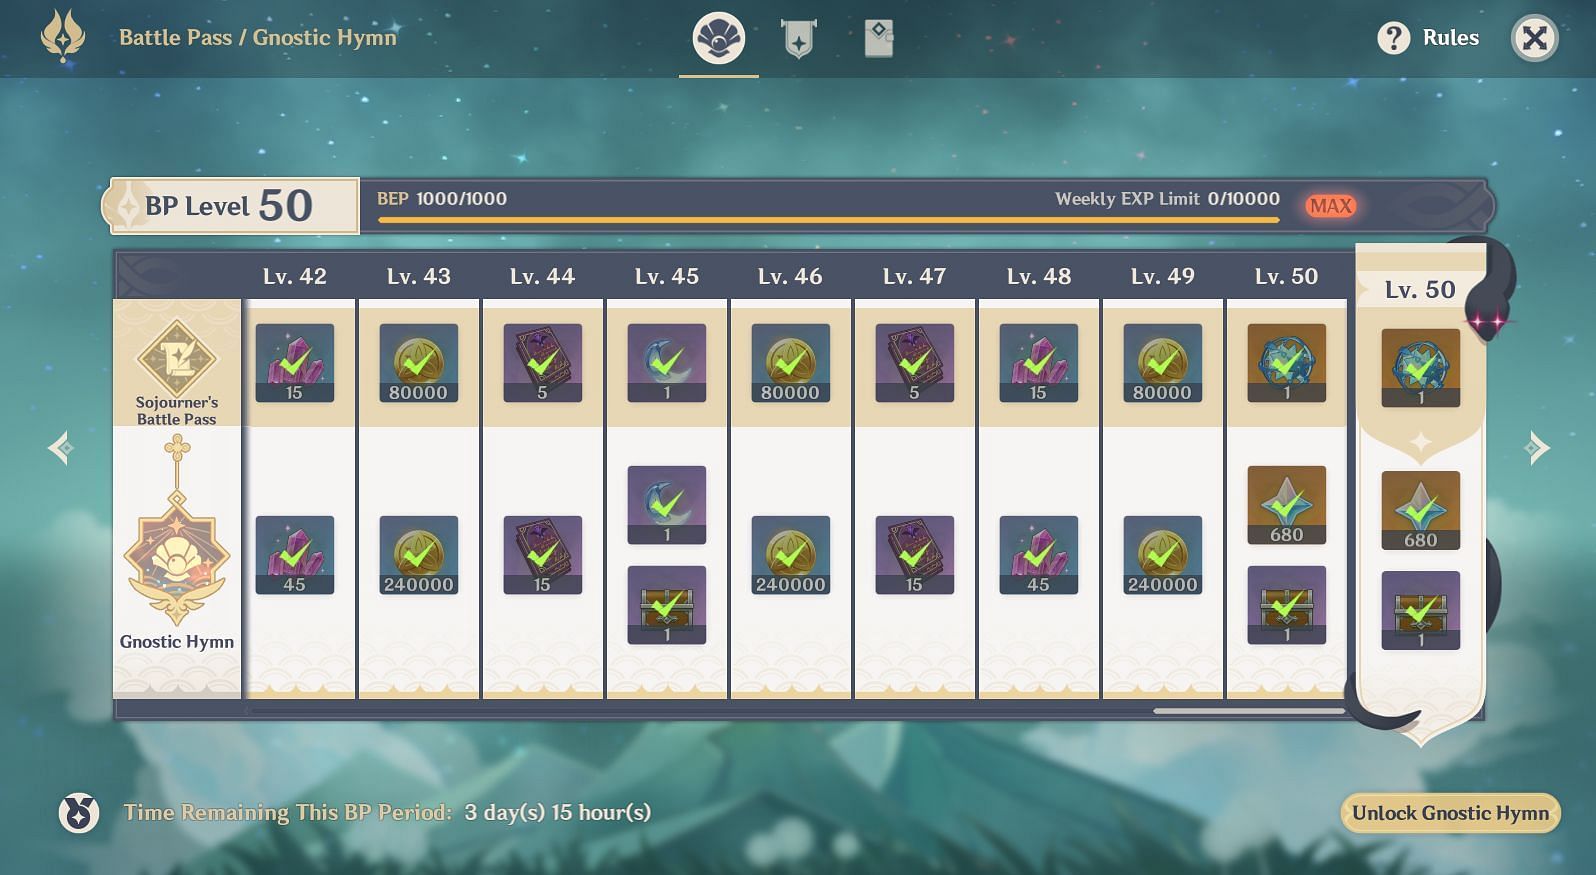 Rewards from Sojourner&#039;s Battle Pass and Gnostic Hymn (Image via Genshin Impact)